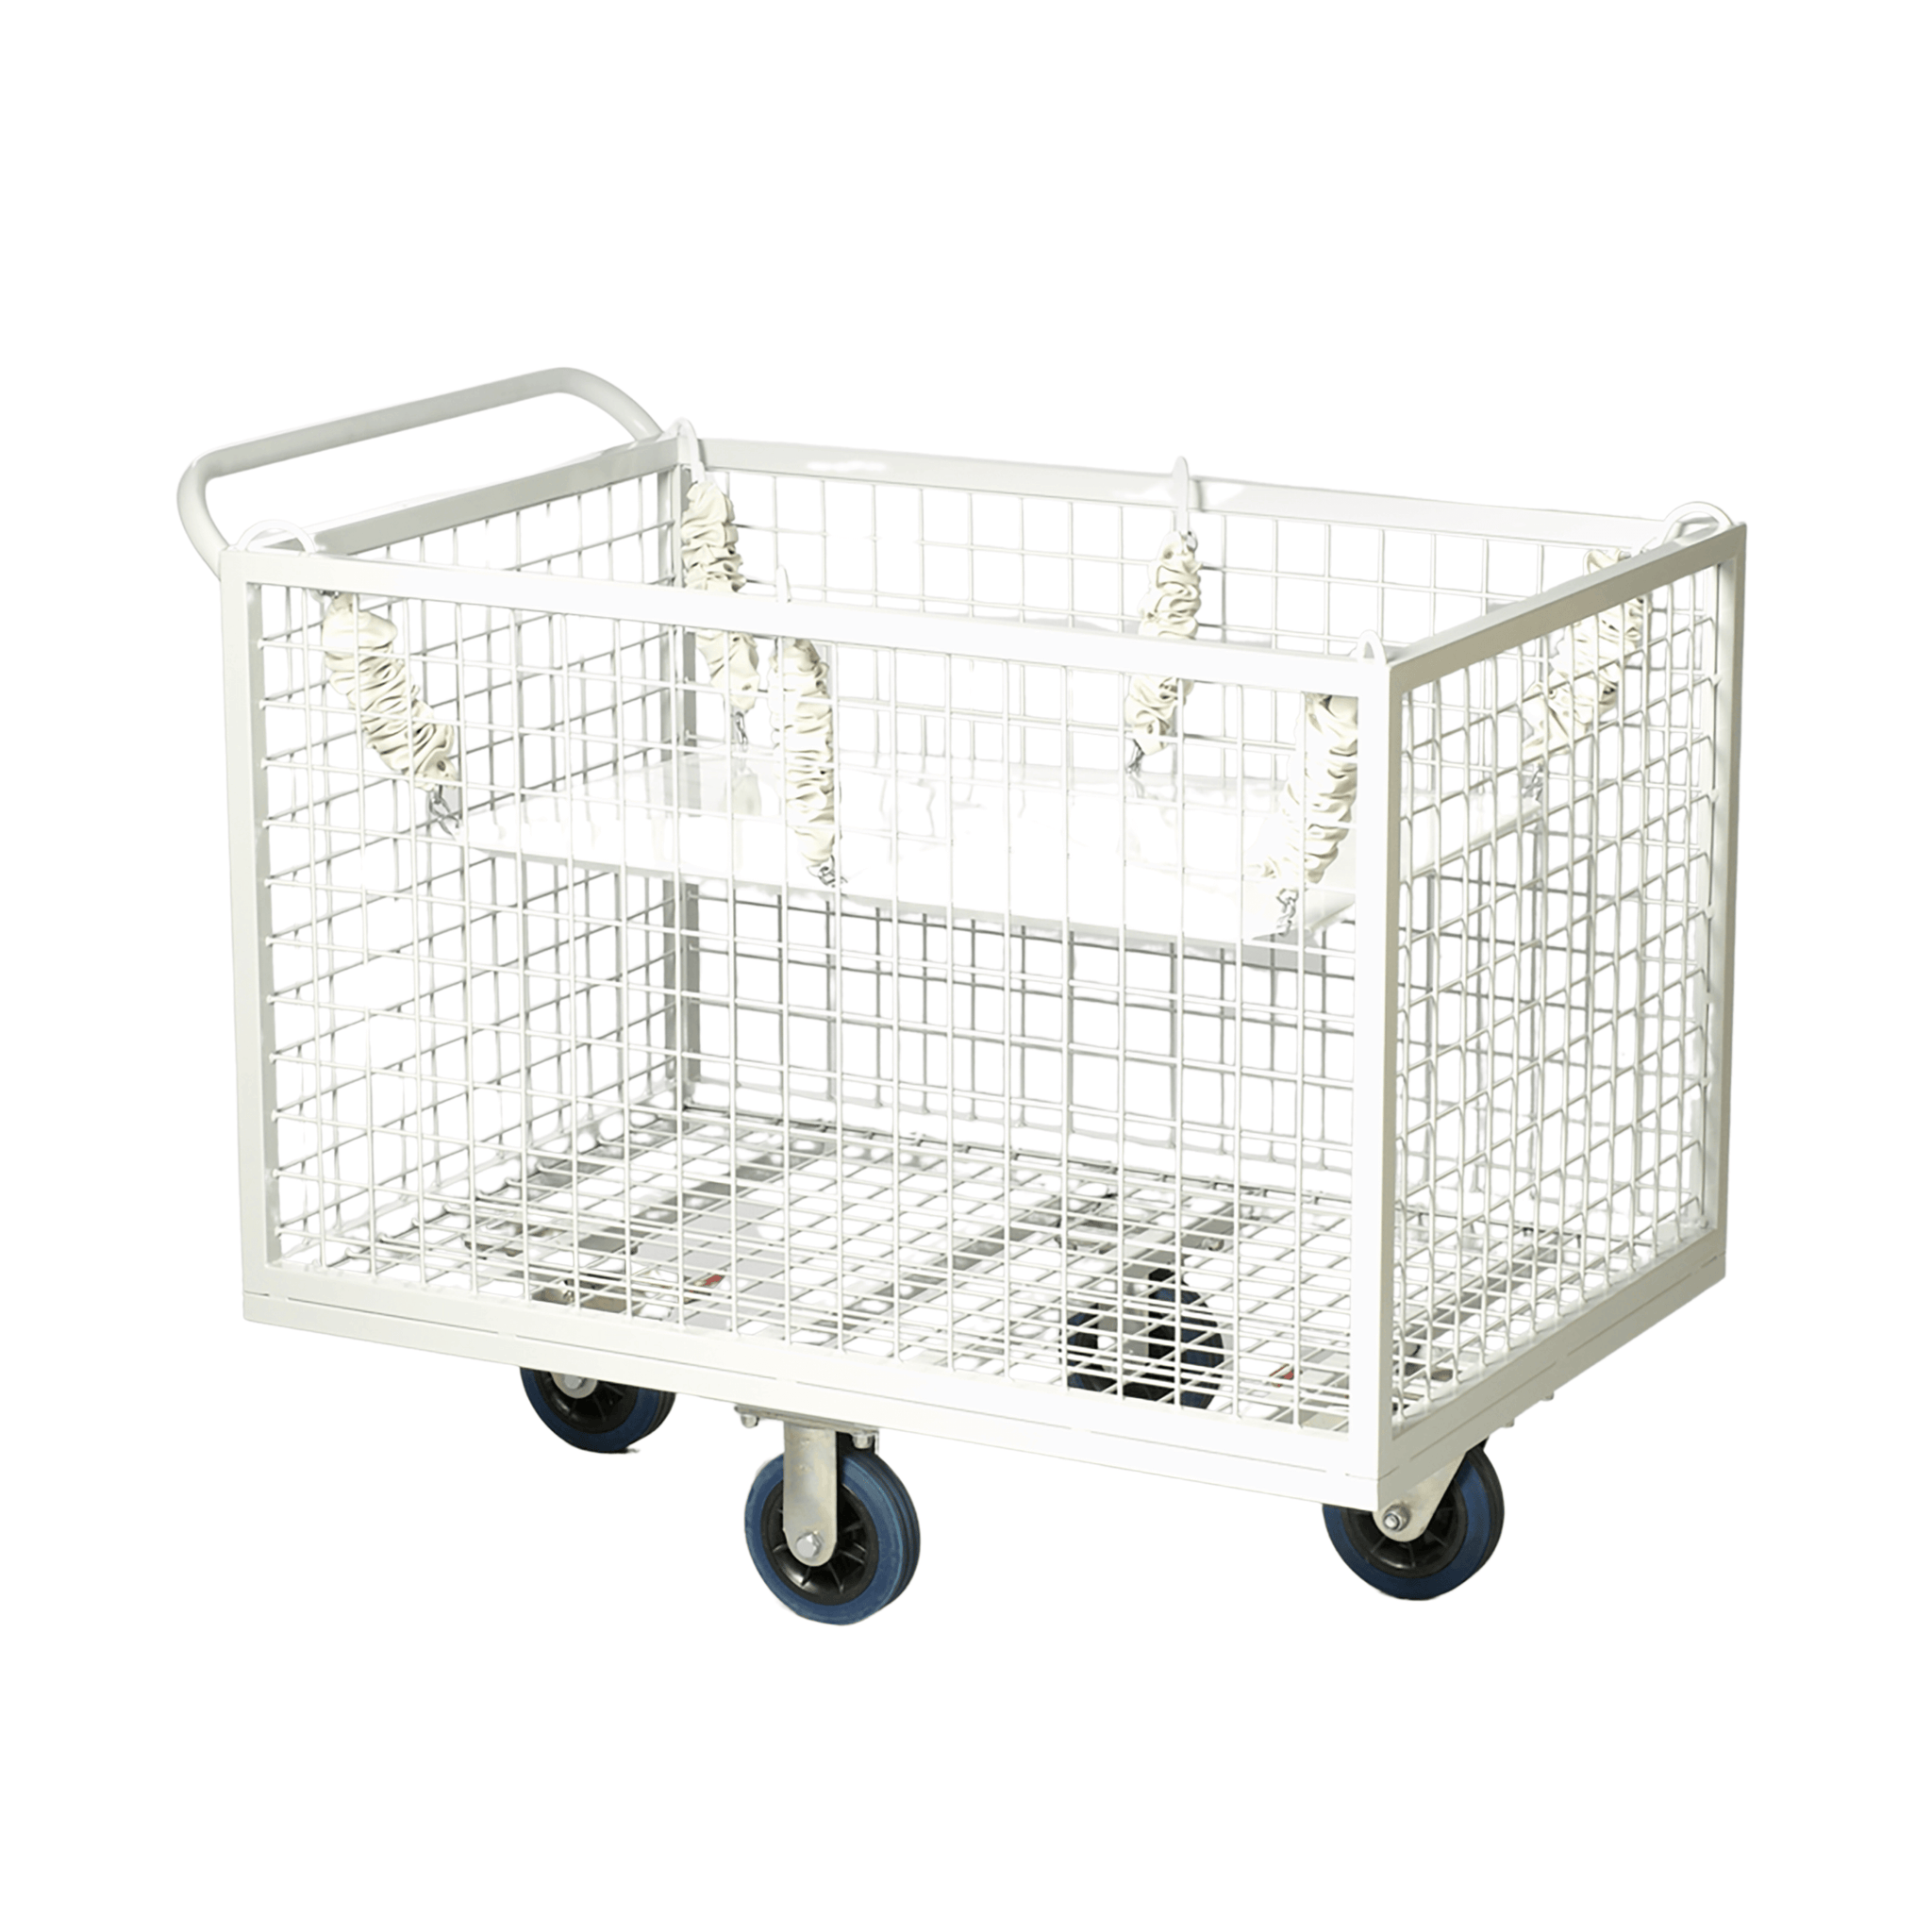 Wet & Dry Laundry Trolley- Spring Loaded Base